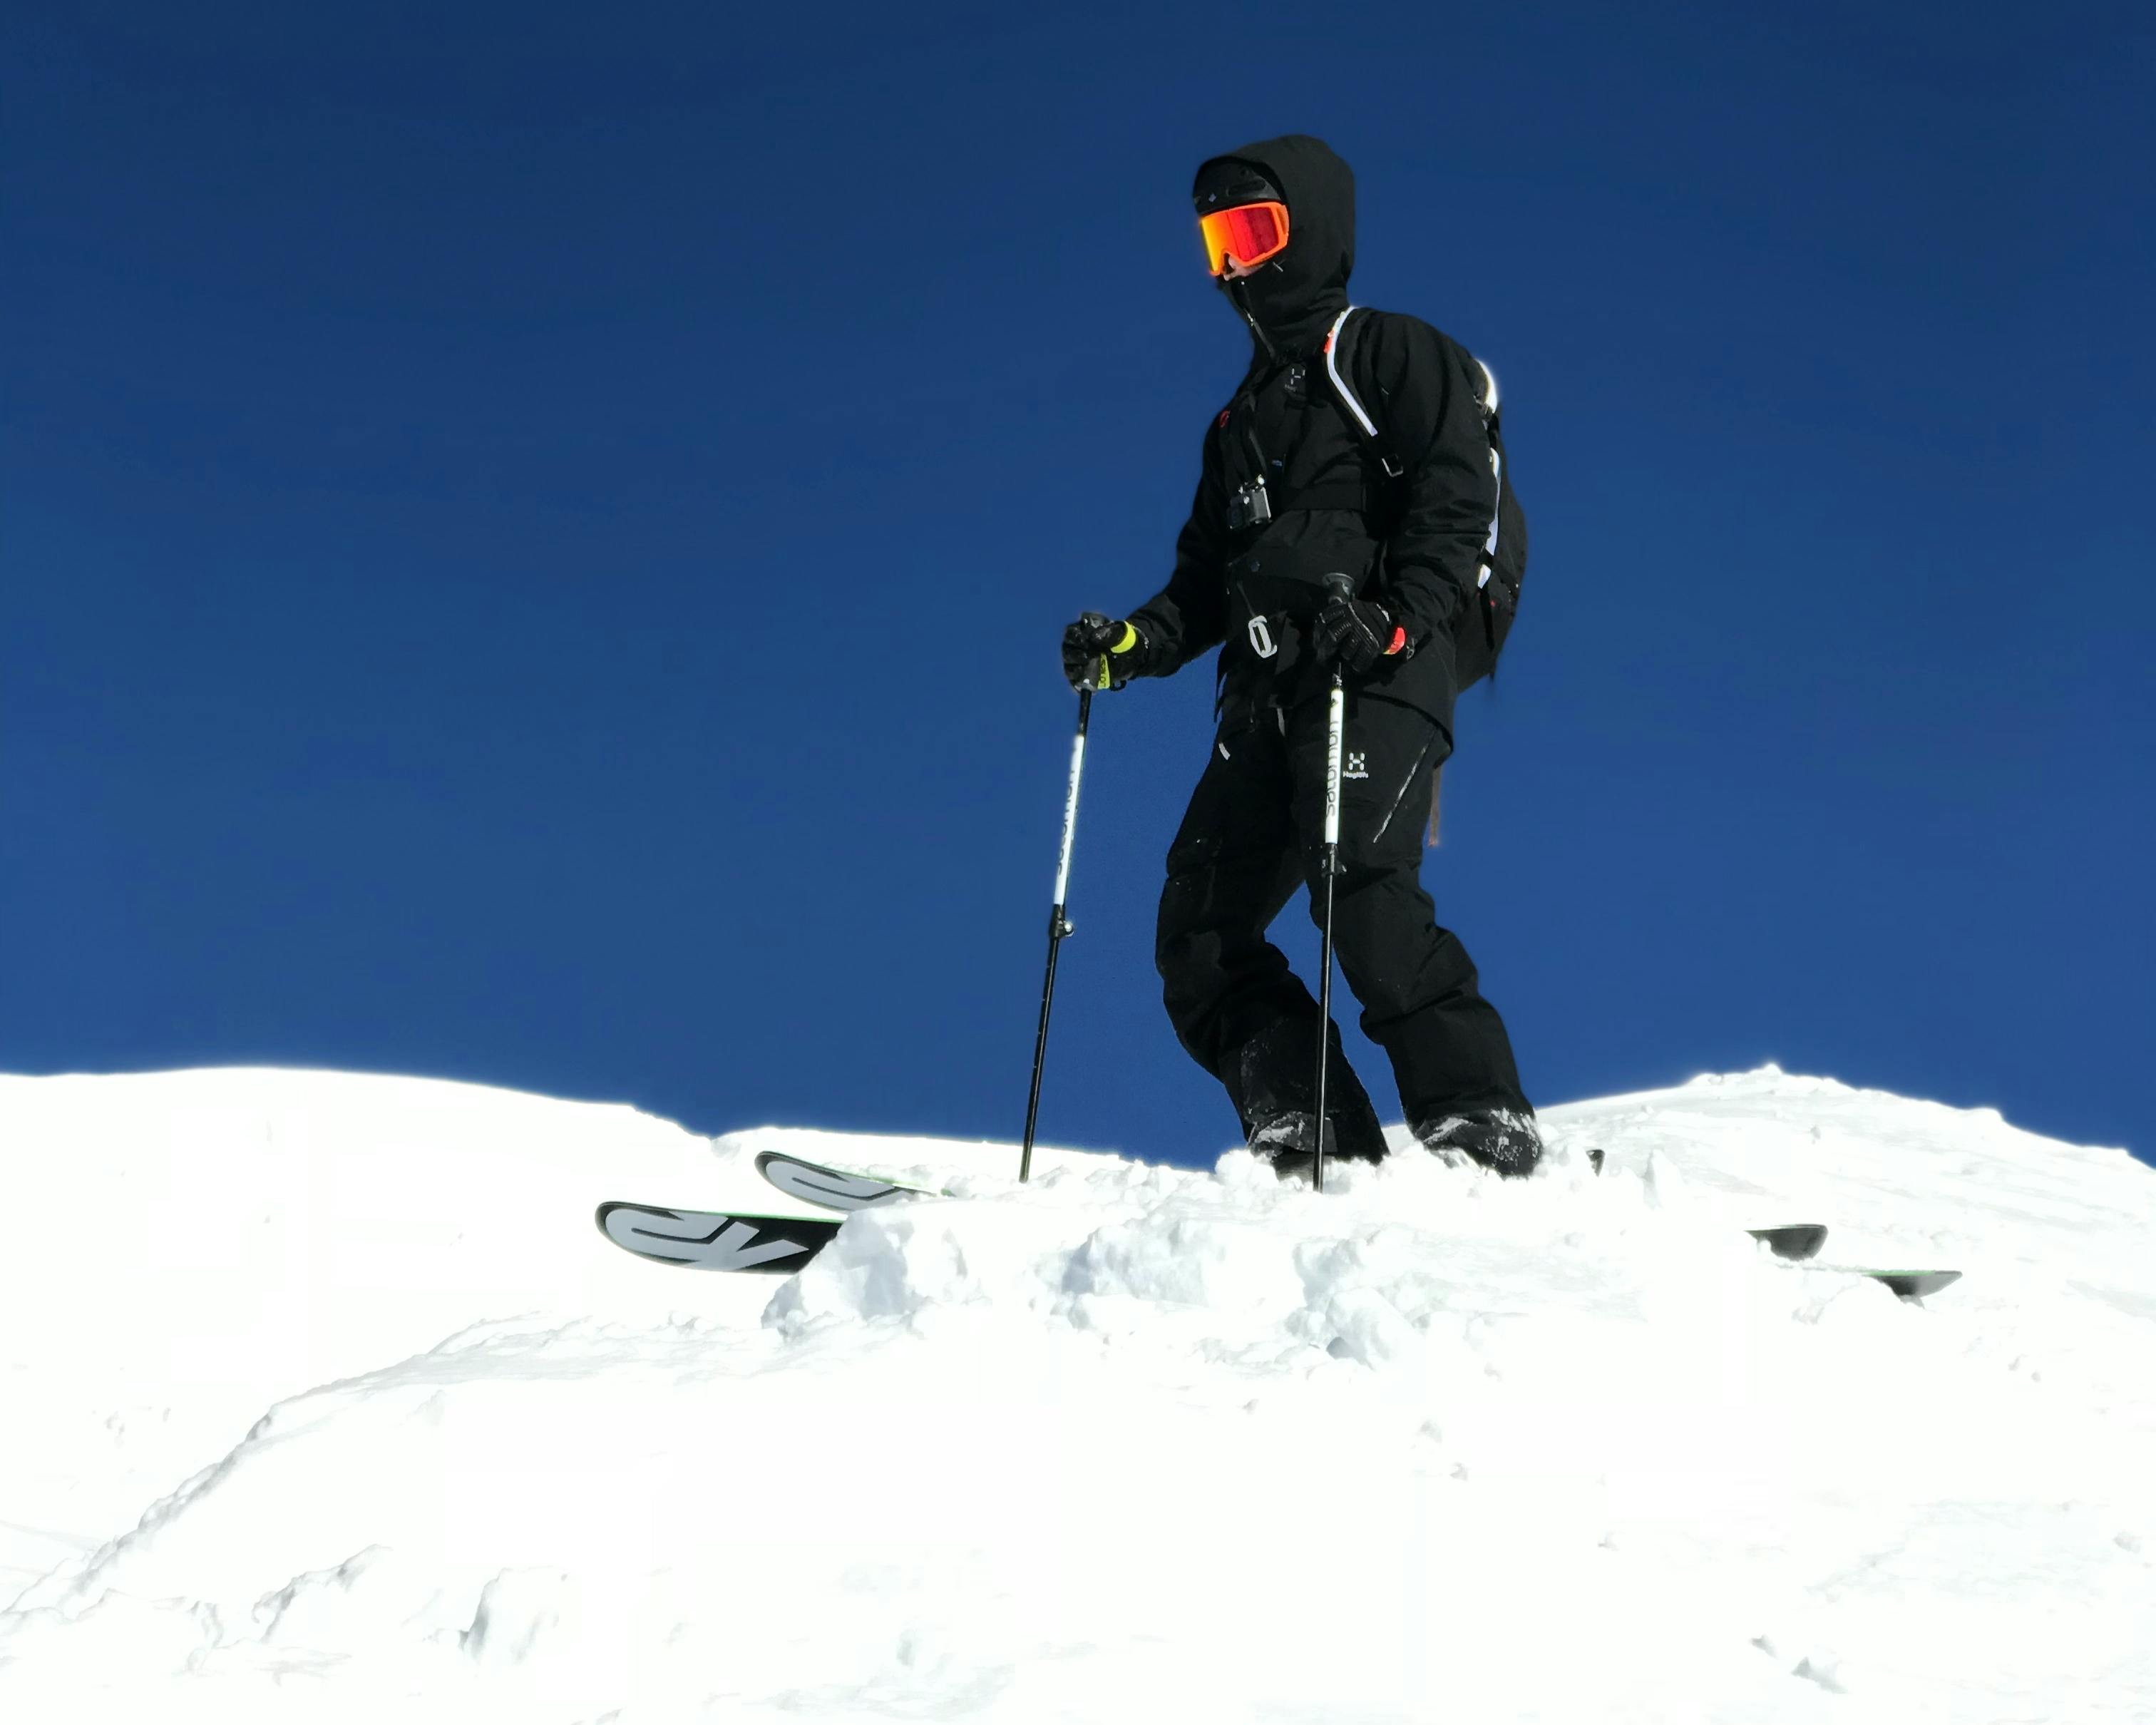 A skier in a black jacket and black ski pants at the top of a ski slope under a clear blue sky